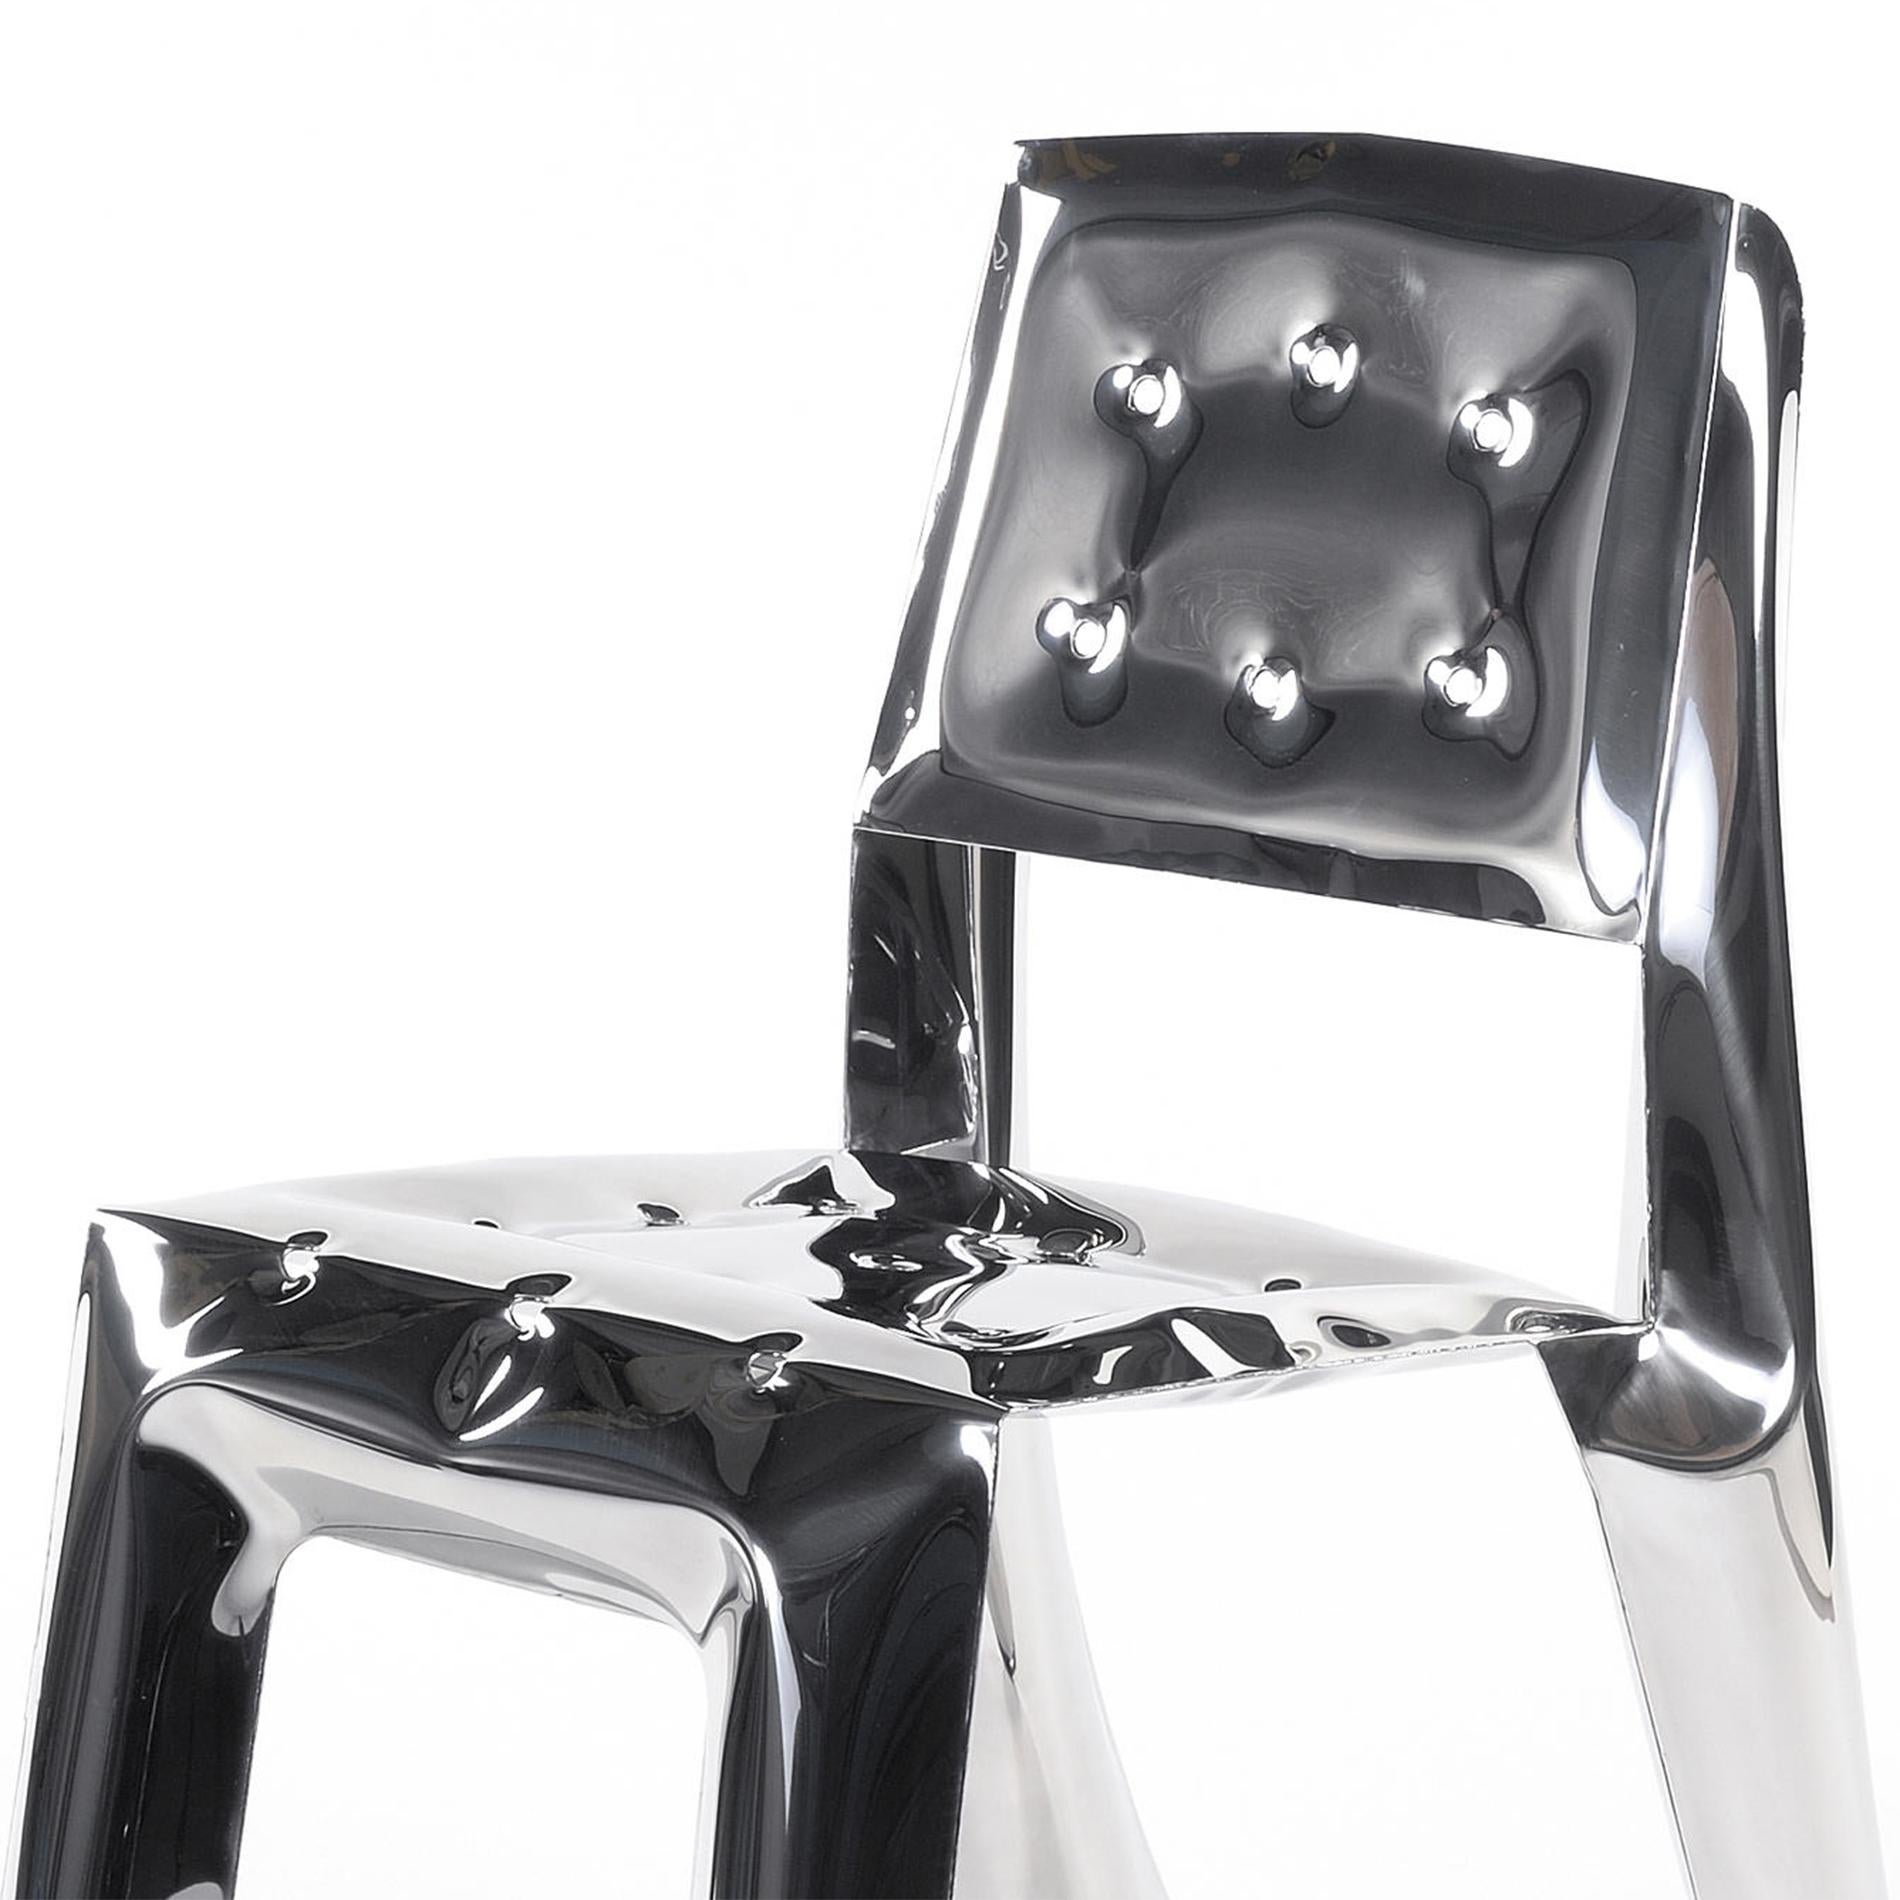 Chair bloat made in polished stainless steel,
using bending properties of steel sheets.